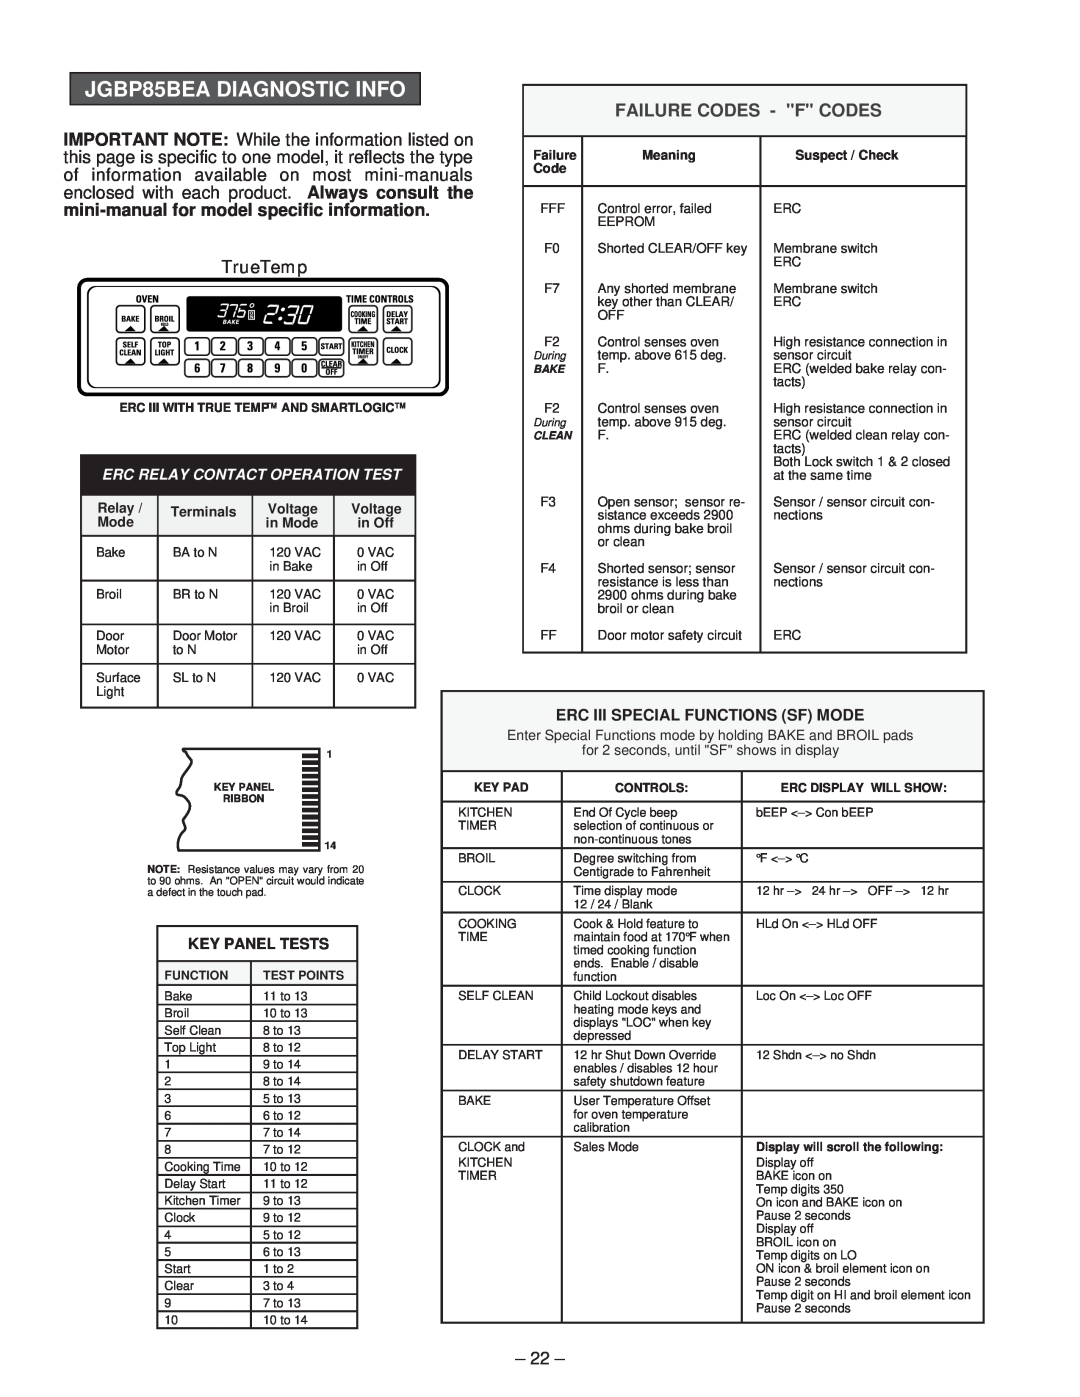 GE JGBP86 A Failure Codes - F Codes, mini-manual for model specific information, TrueTemp, Key Panel Tests, Relay, Voltage 